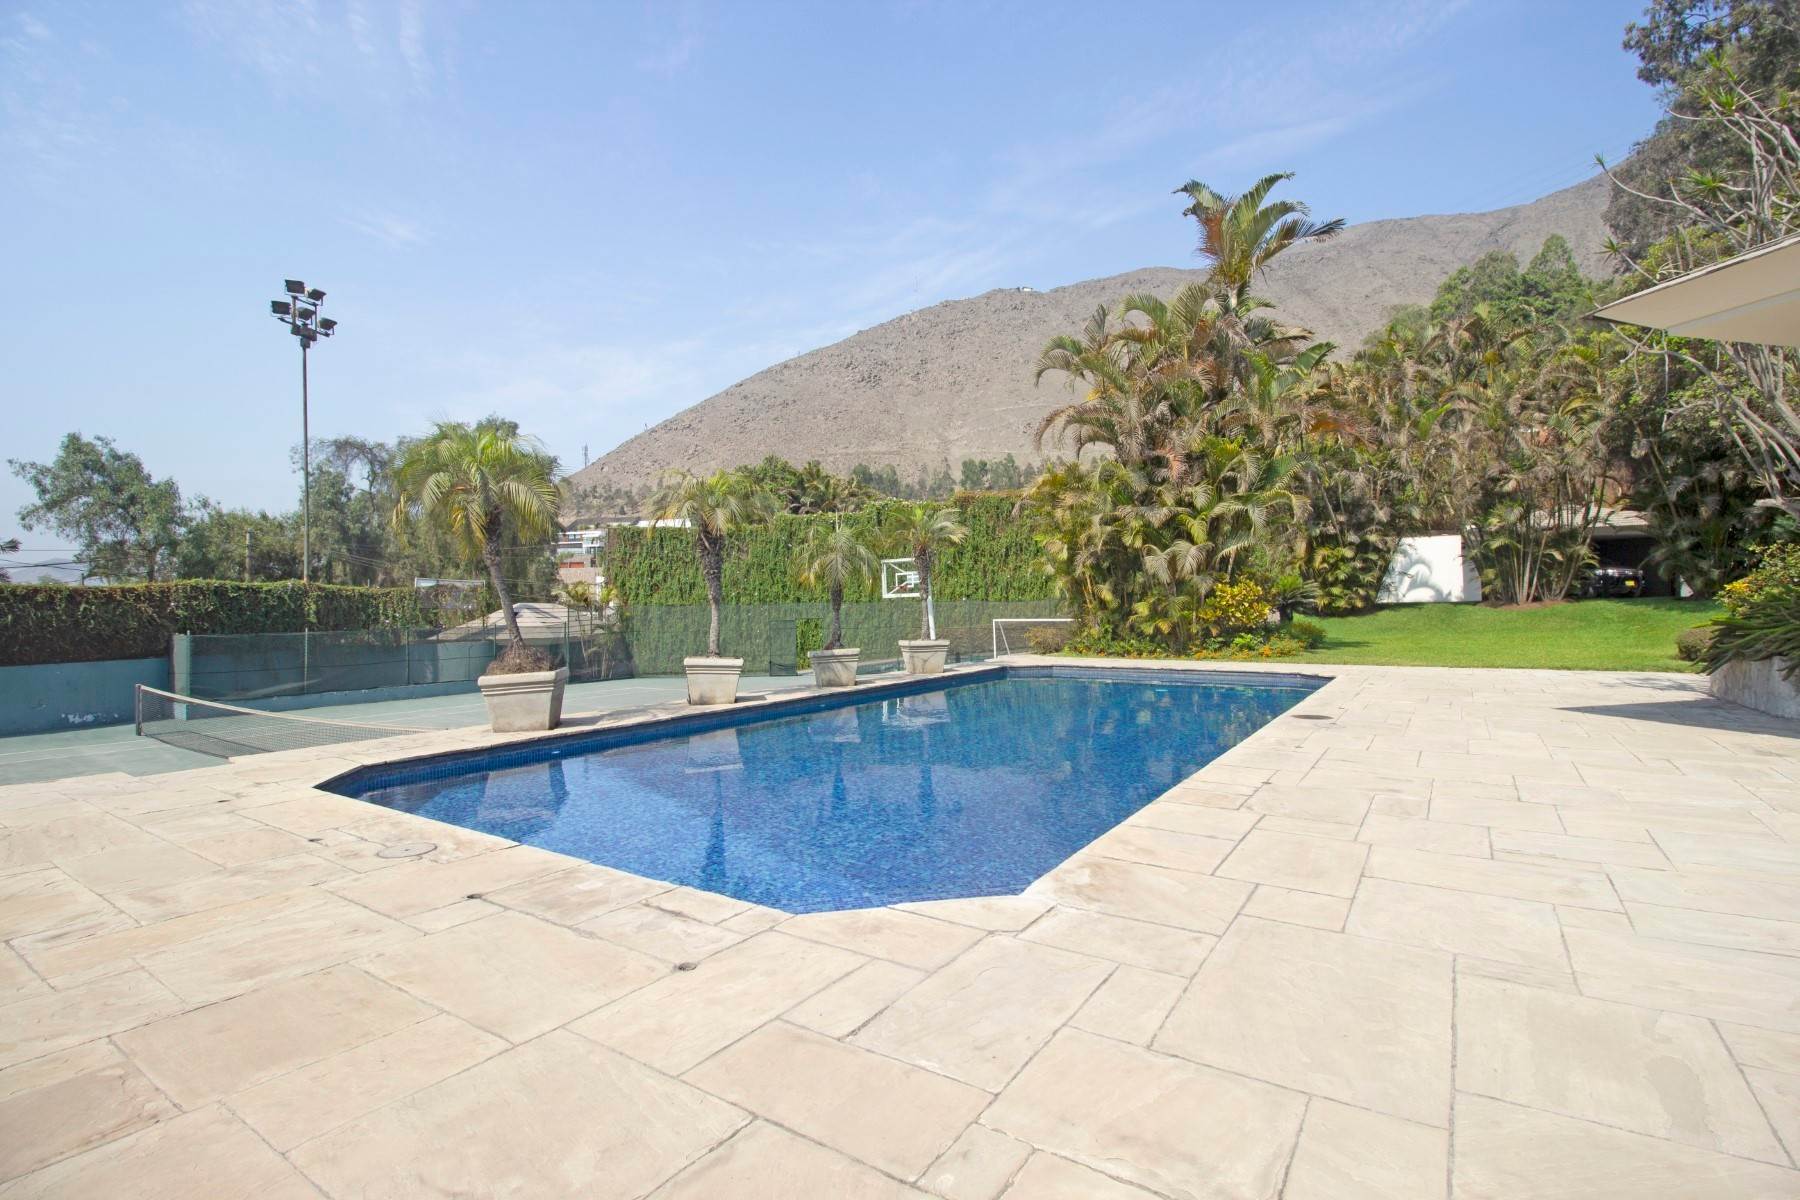 Multi-Family Homes for Sale at Extraordinary house in one of the best areas of the plain with swimming pool Calle La Compuerta, La Planicie Other Peru, Other Areas In Peru 12 Peru